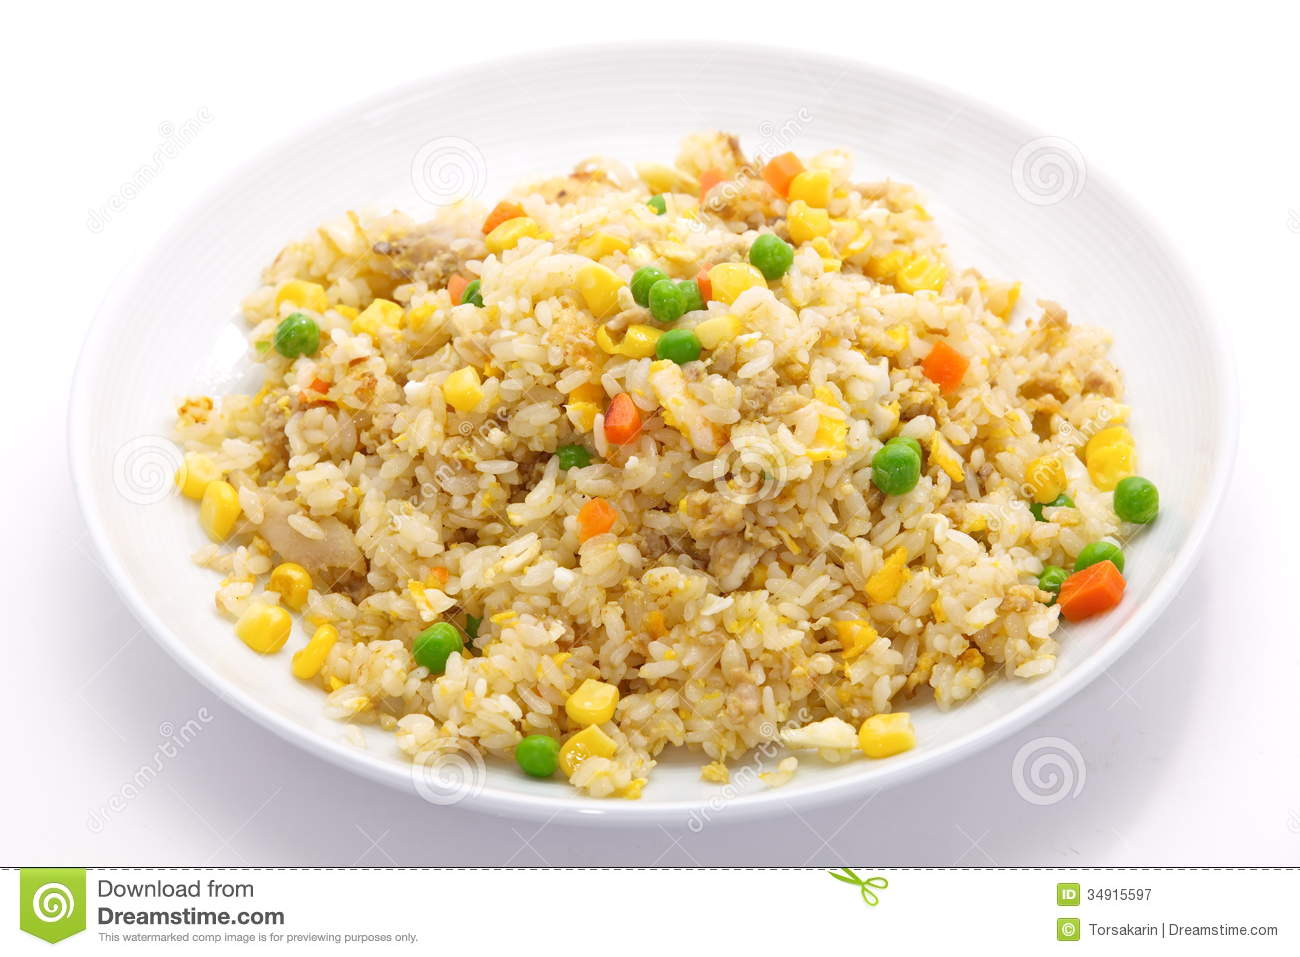 Fried Rice Royalty Free Stock Photography   Image  34915597